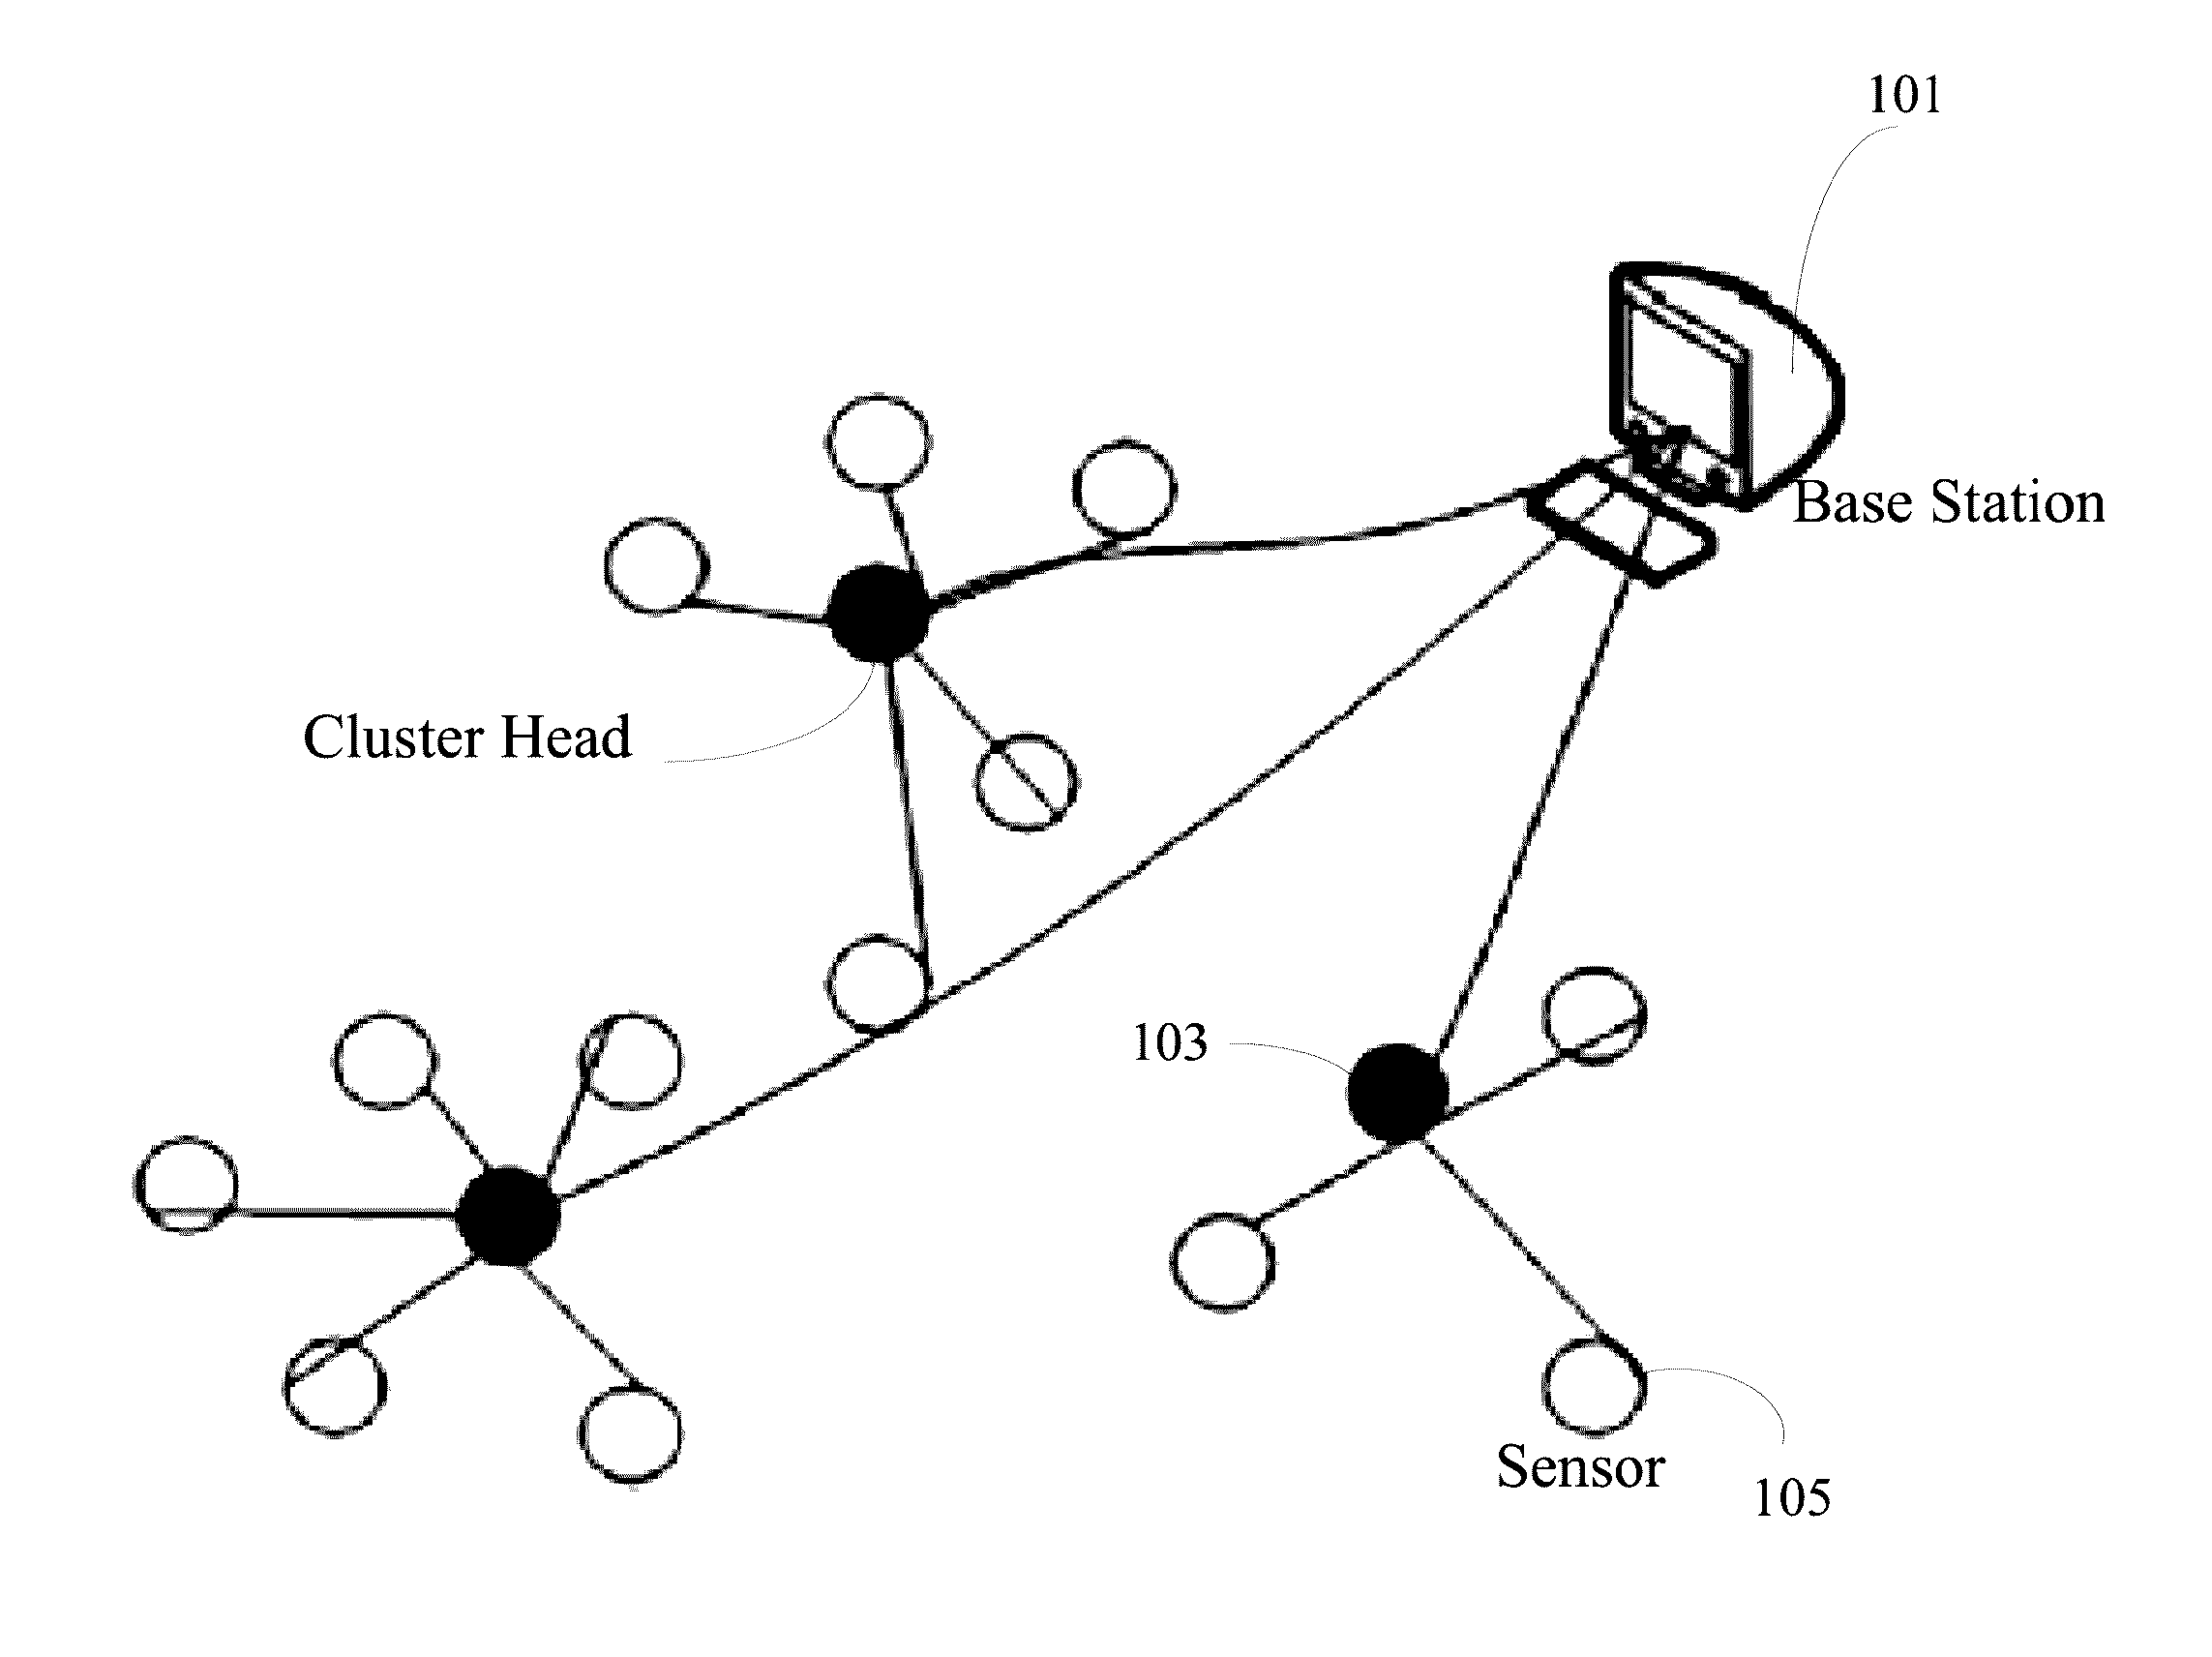 Apparatus and method for evaluating wireless sensor networks